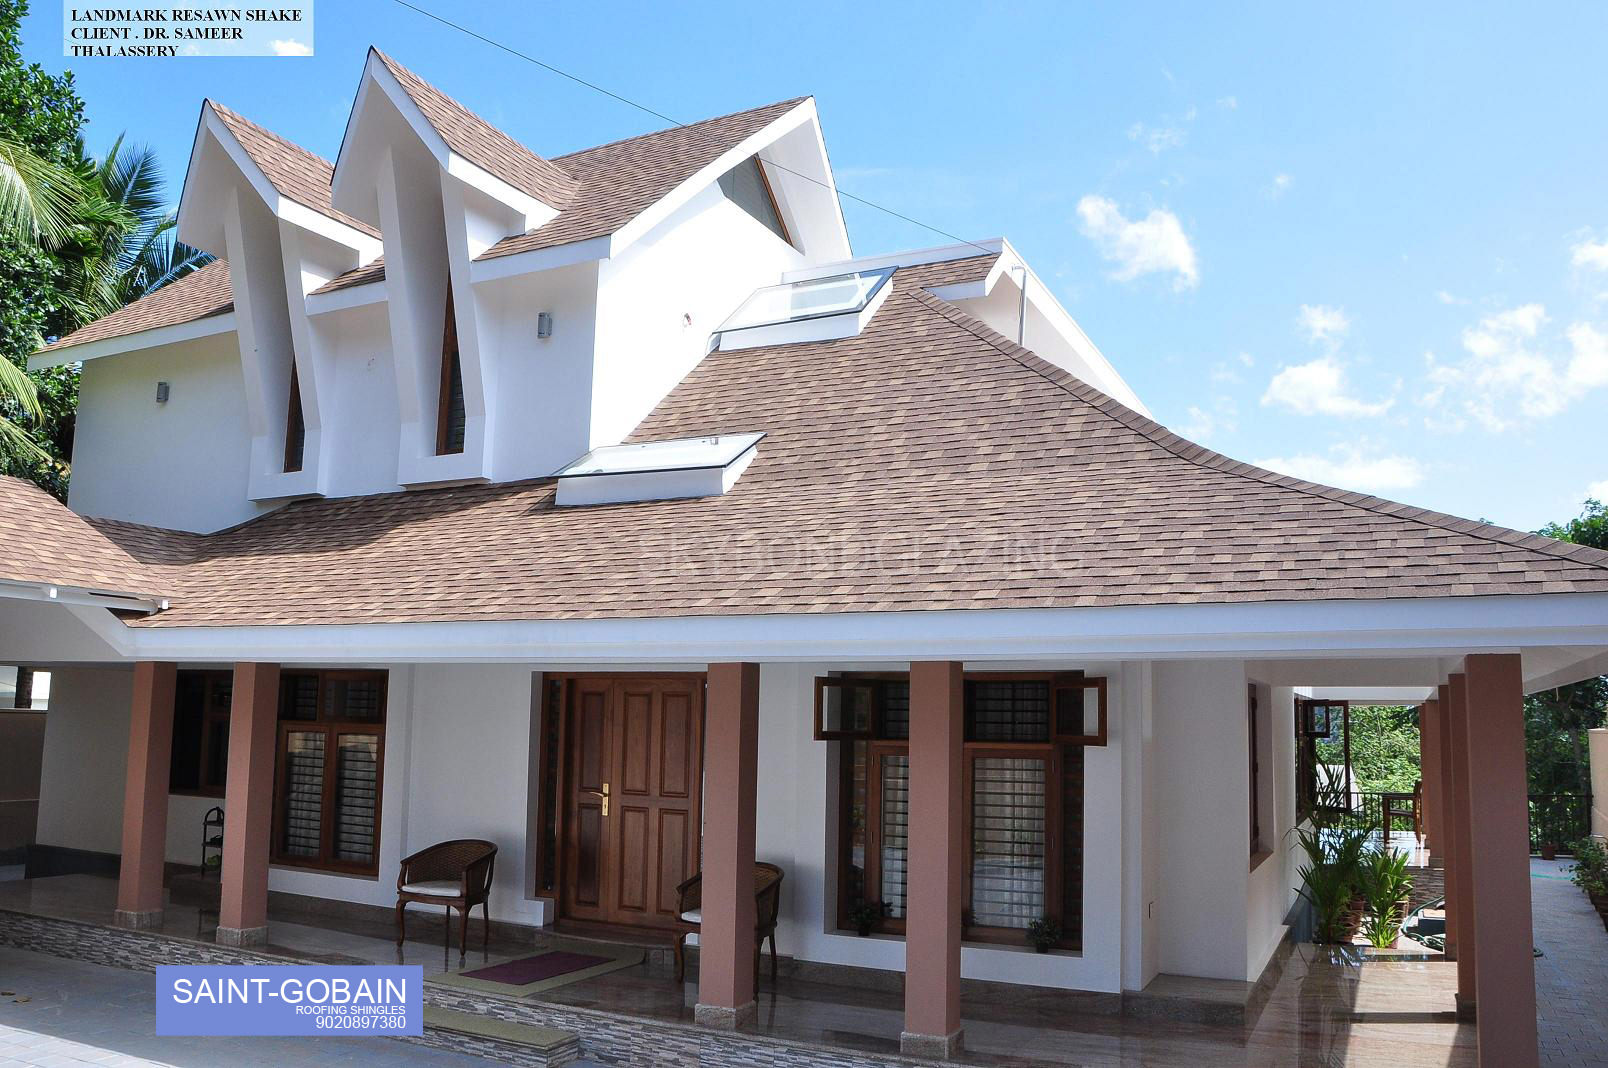 Skybond Roofing Exclusive Dealer And Applicator Of Saint Gobain Roofing Shingles